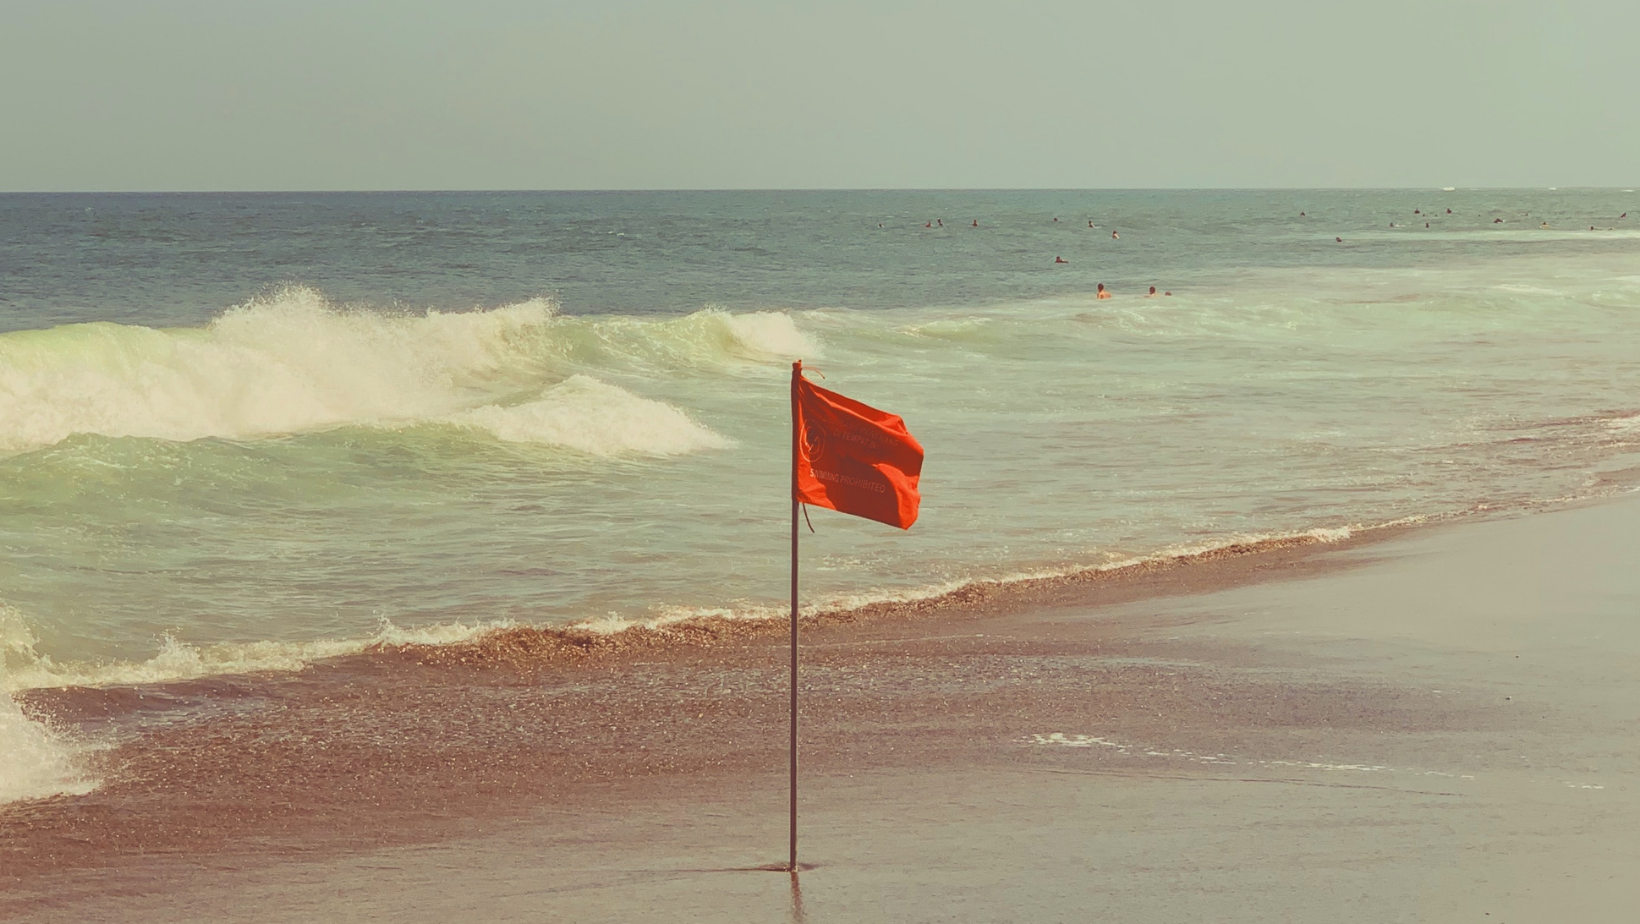 Day 17: Why You Should Not Hire When are Seeing Red (or Even Yellow) Flags